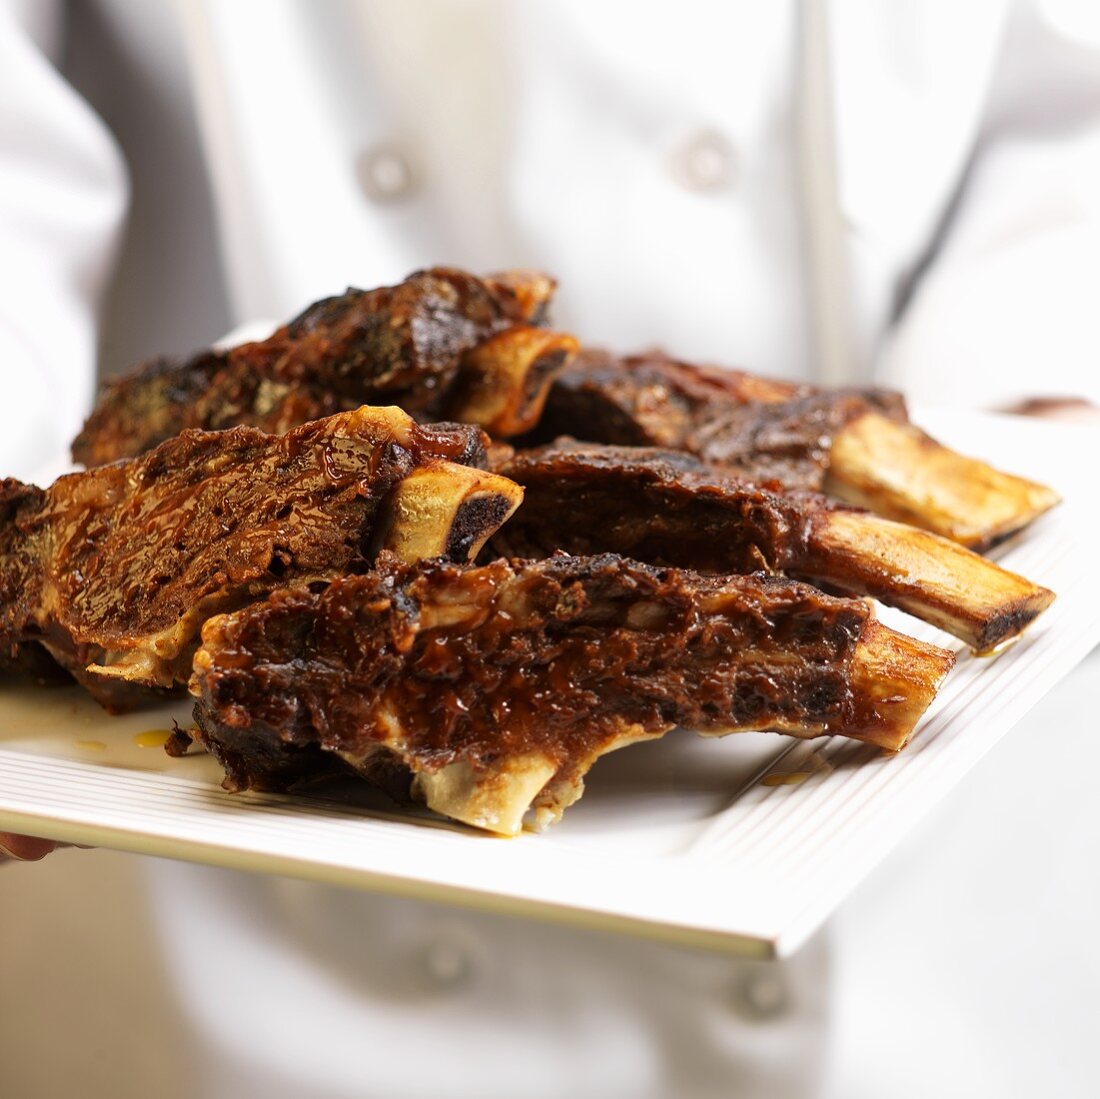 Person Holding Plate of Beef Ribs